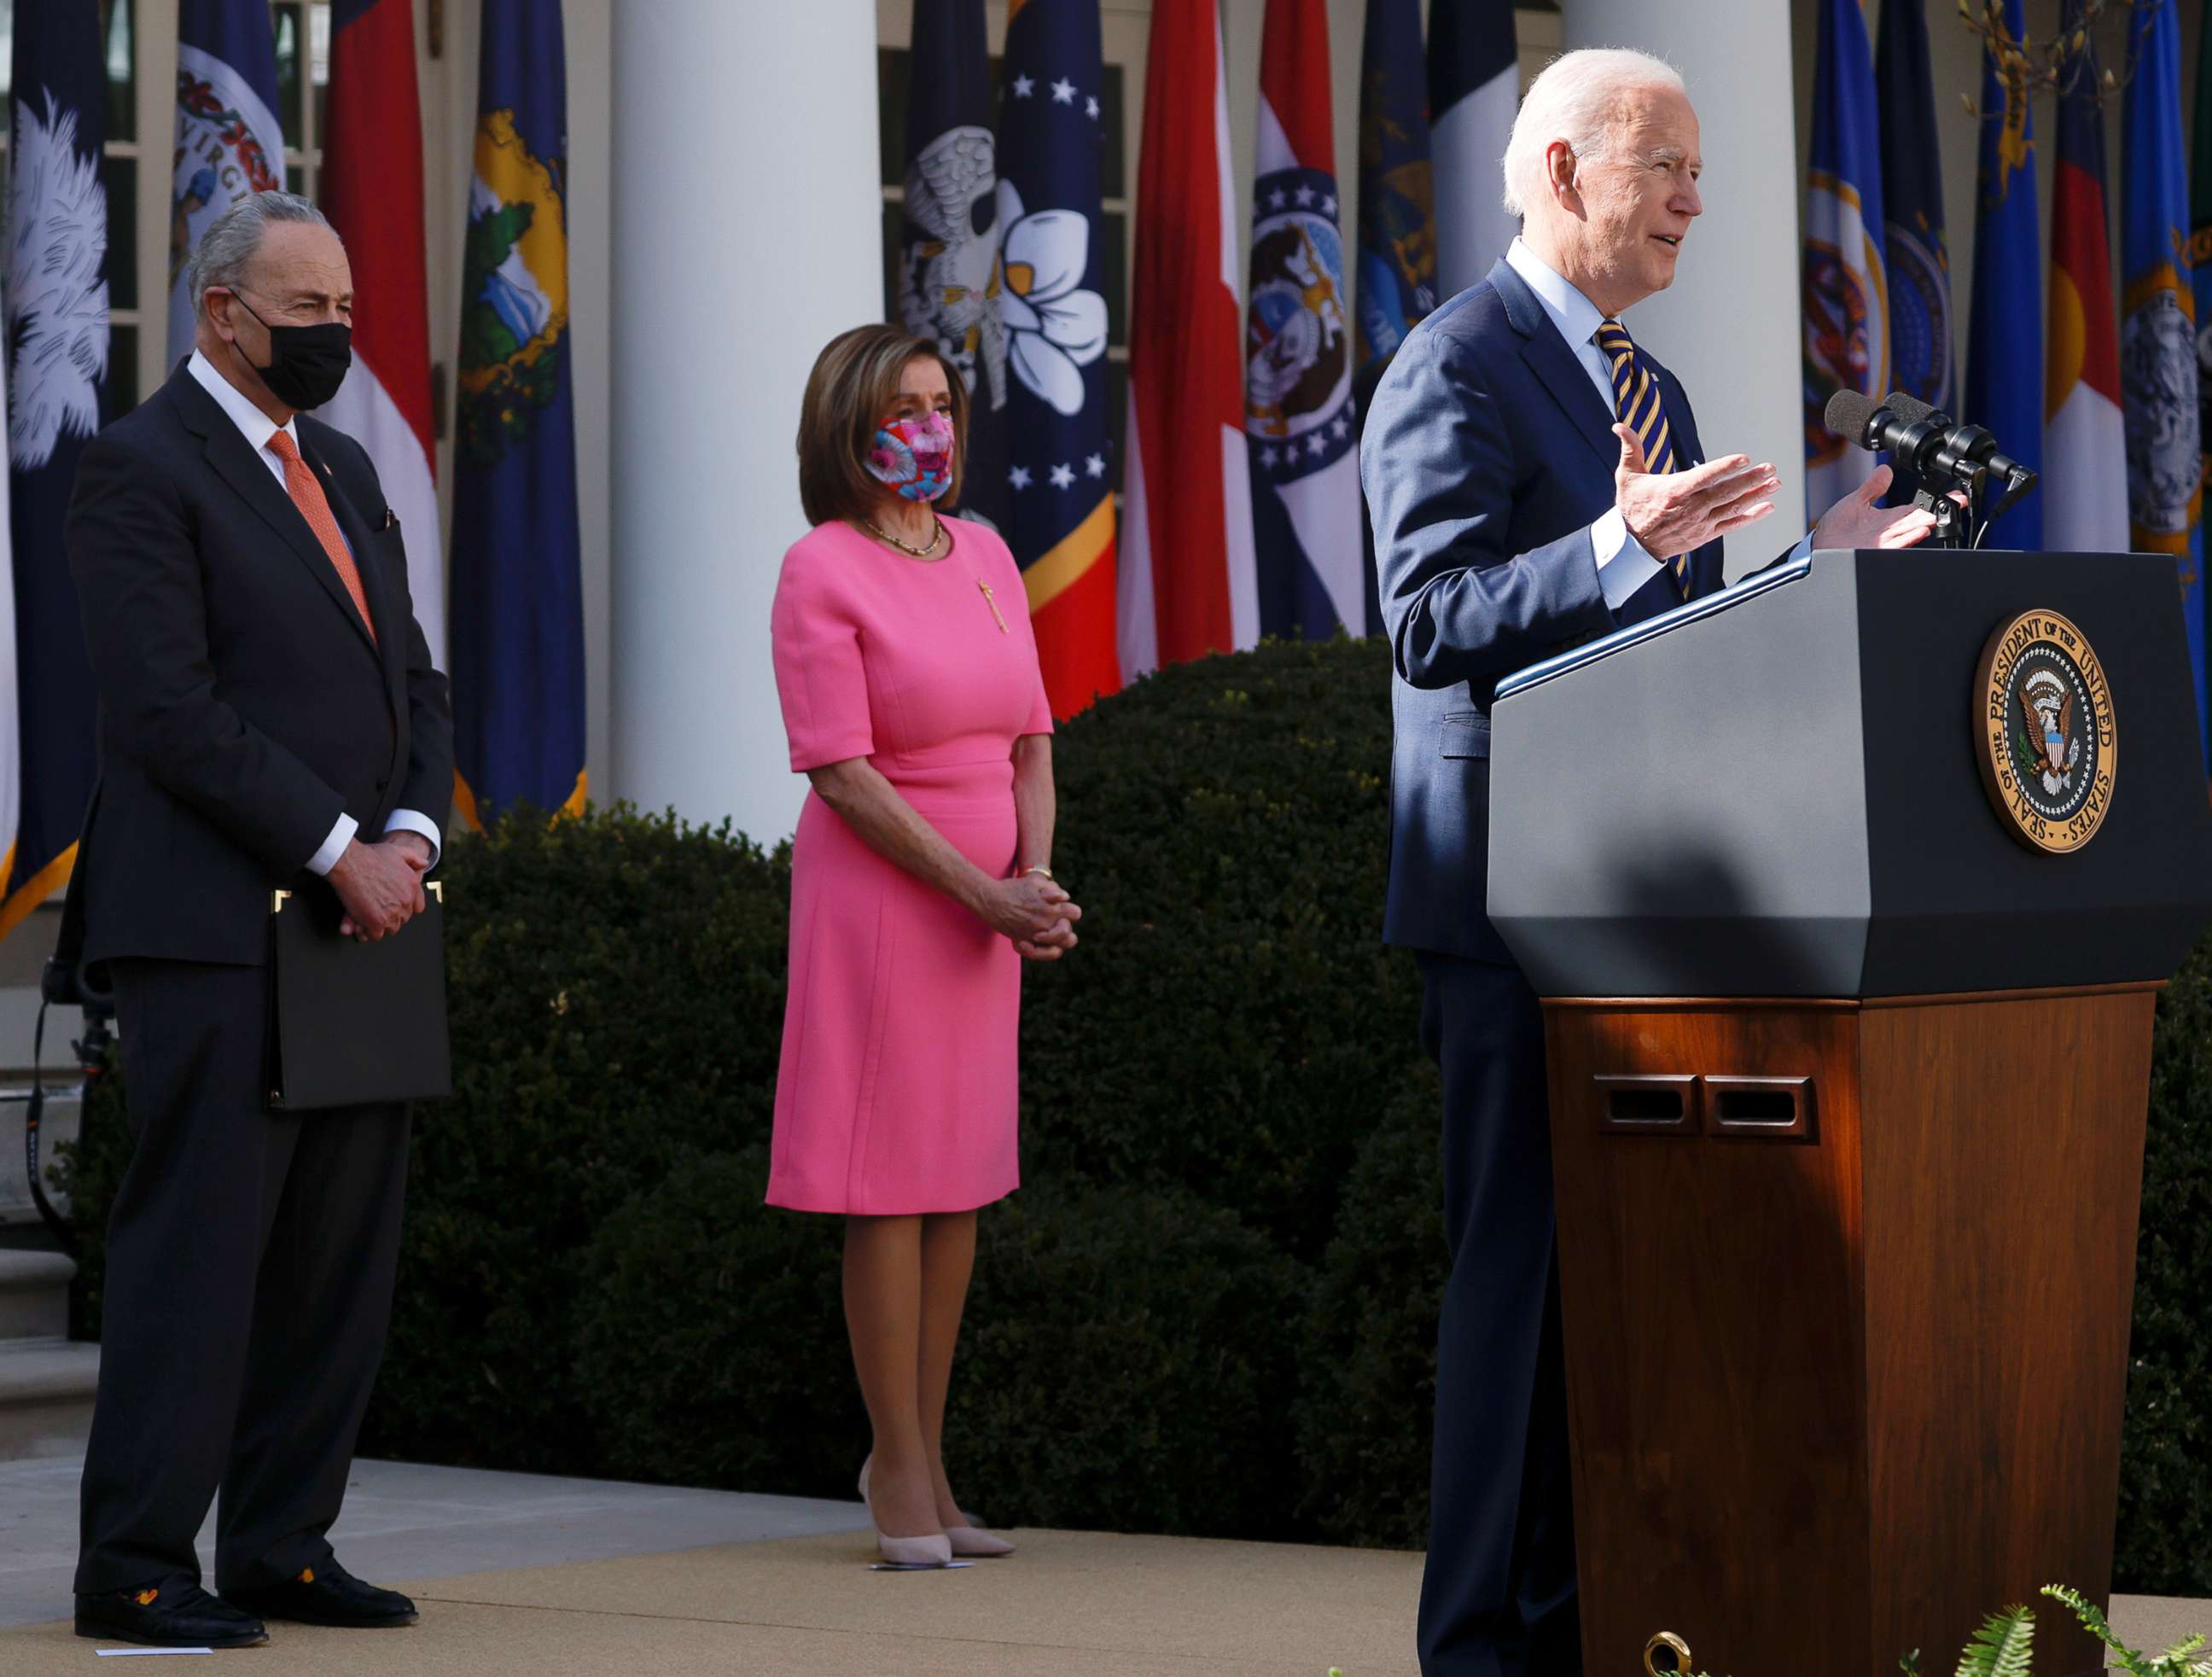 PHOTO: President Joe Biden speaks as Senate Majority Leader Chuck Schumer and House Speaker Nancy Pelosi attend a press conference in the Rose Garden of the White House in Washington, March 21, 2021.